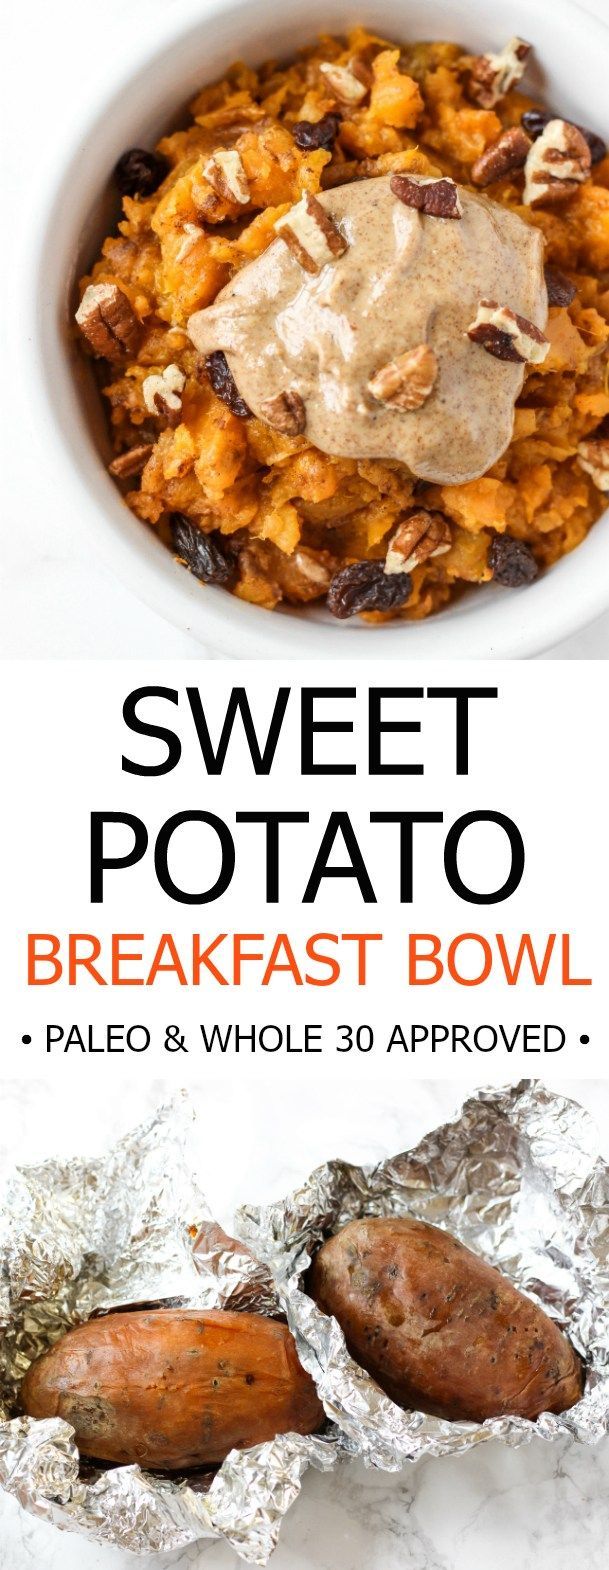 This sweet potato breakfast bowl is an easy, make-ahead healthy breakfast that reminds me of sweet potato casserole! //